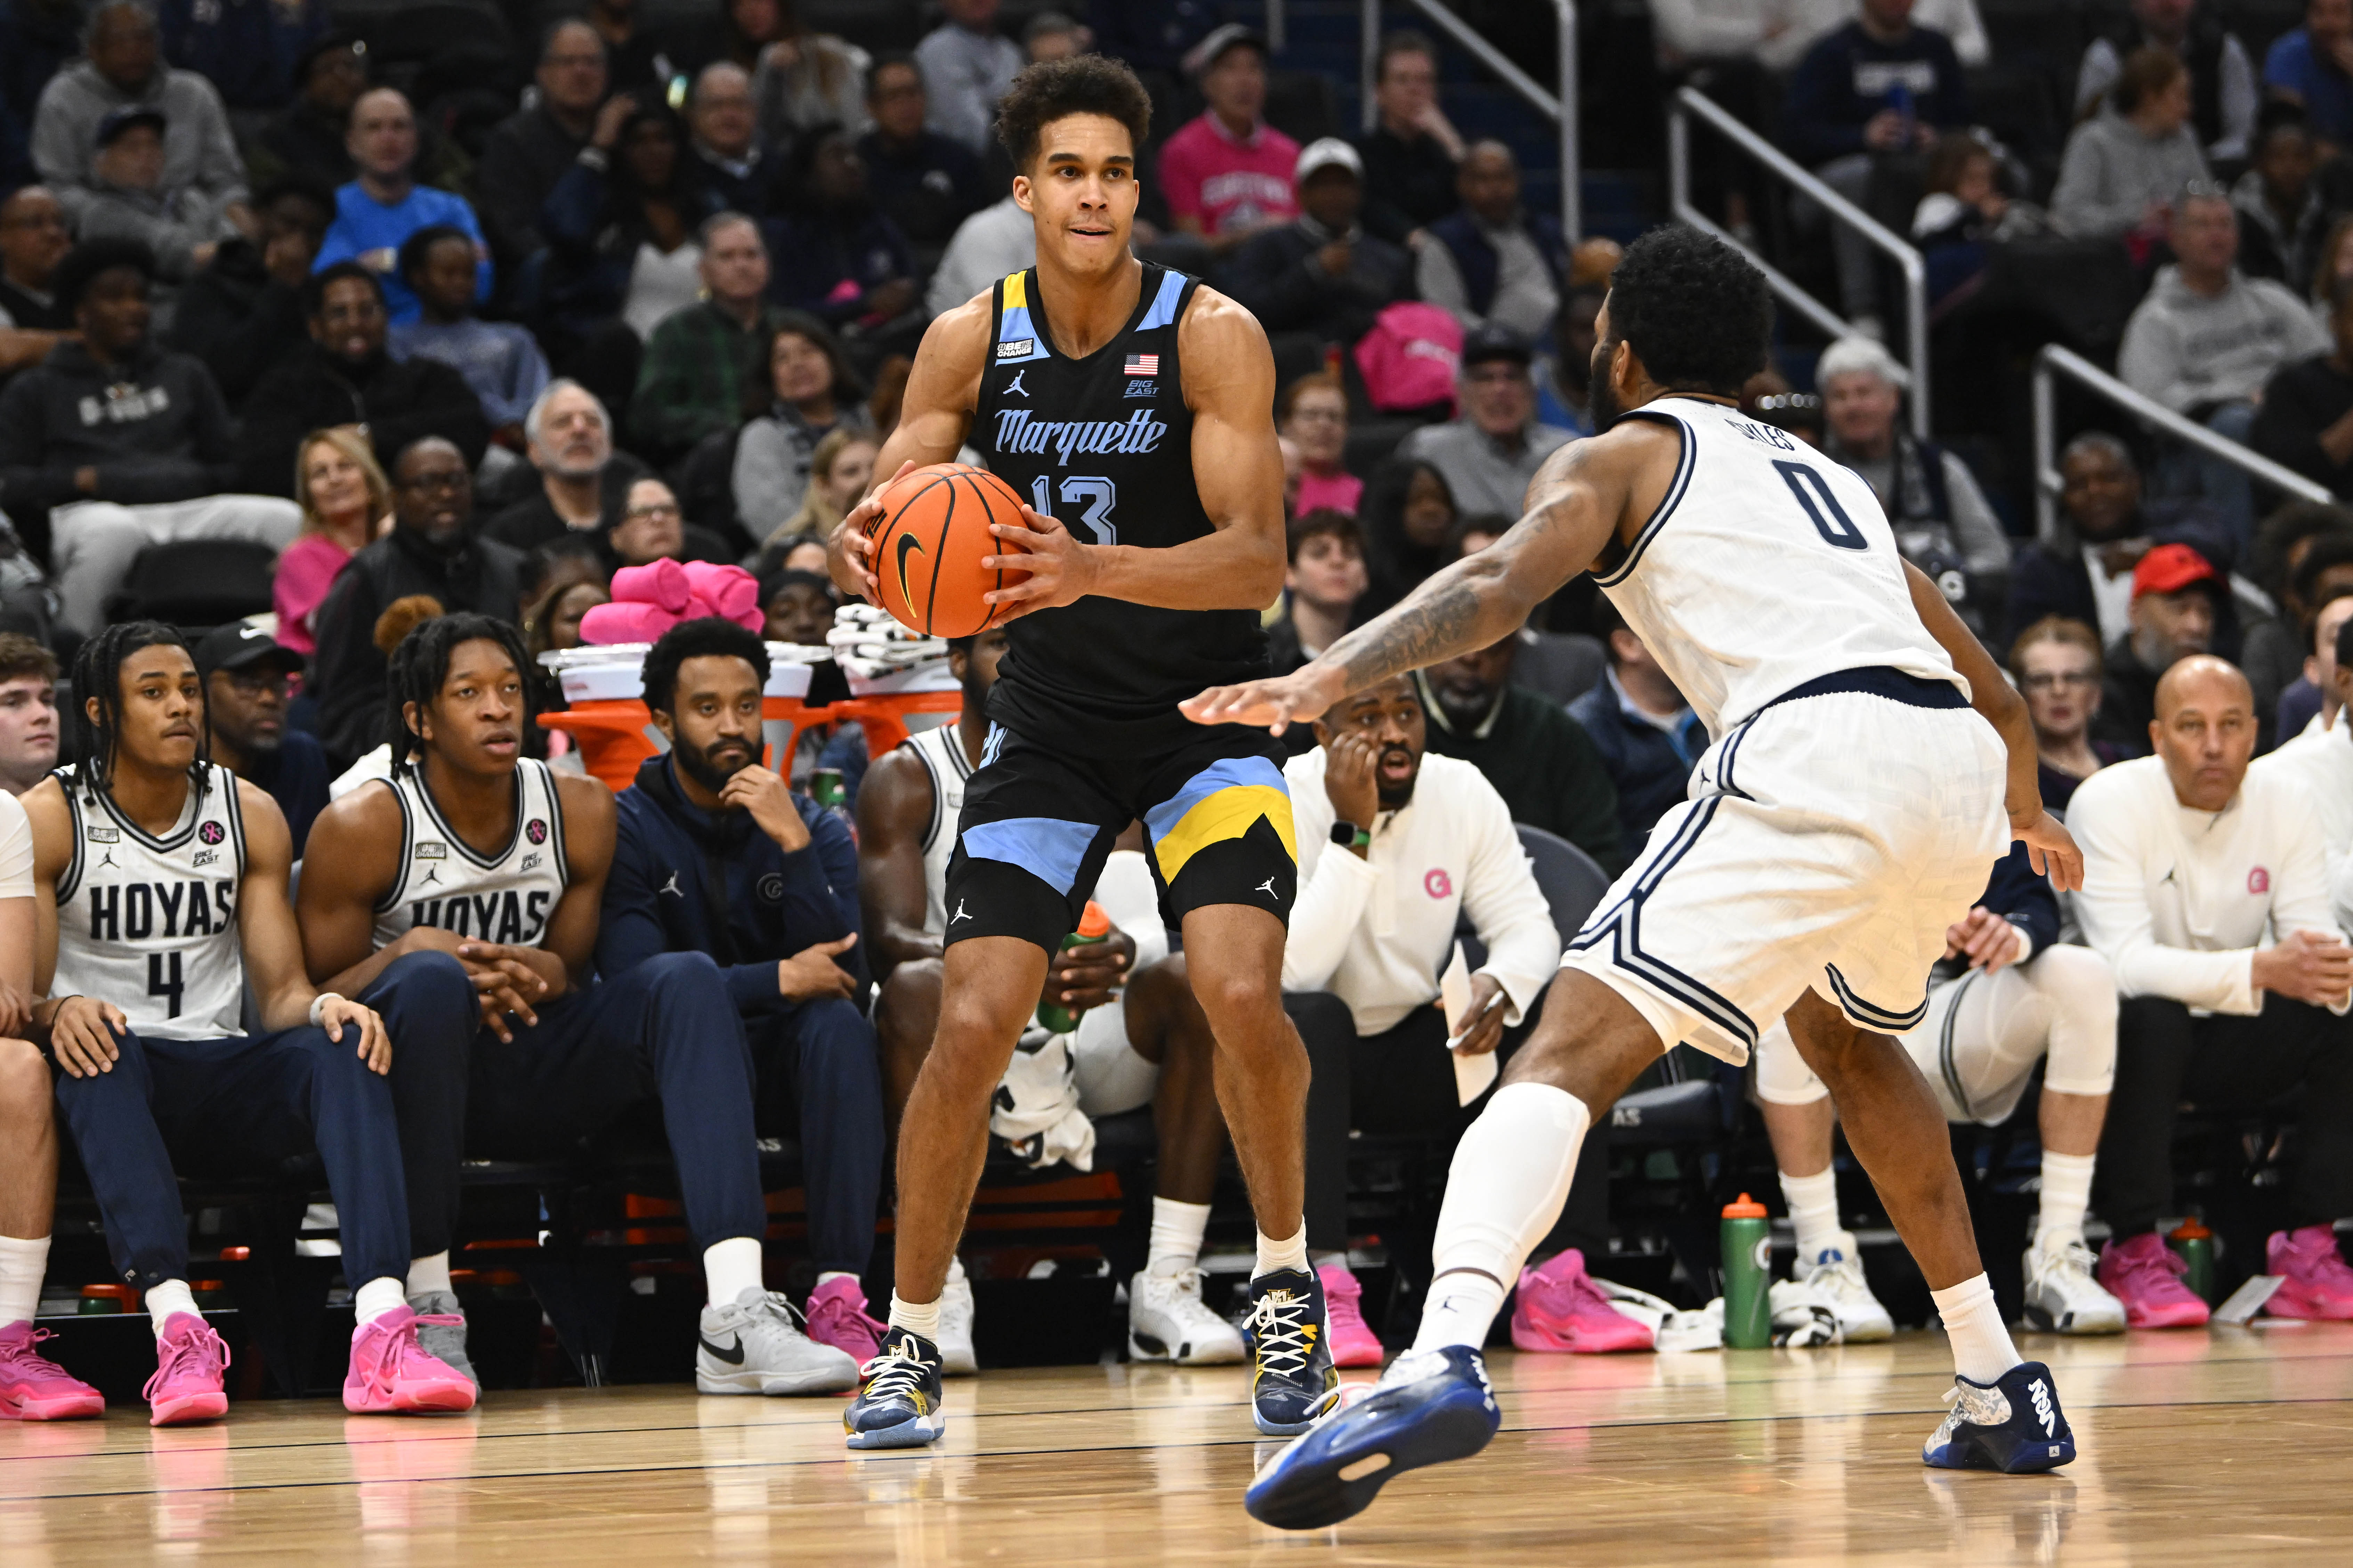 Kam Jones scores 28 to lift Marquette in NCAA tourney opener - Athlon Sports  High School News, Analysis and More